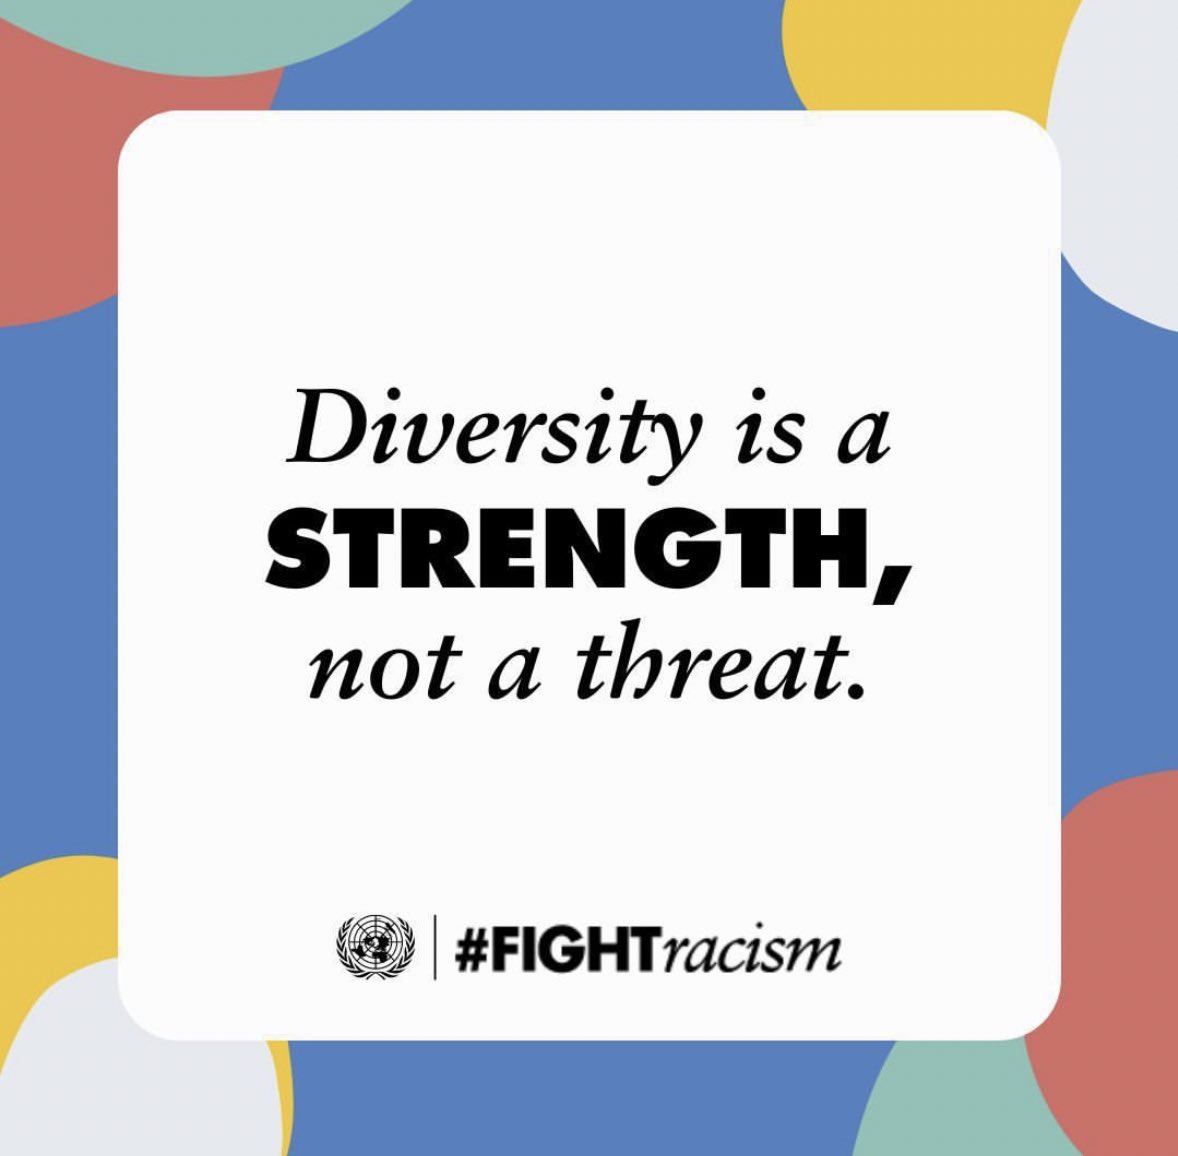 Diversity is a strength, not a threat. Yet, racism is a problem in every country. Stand up and speak out for our common humanity. #FightRacism and intolerance every day, everywhere. See how you can get engaged: un.org/en/fight-racis…